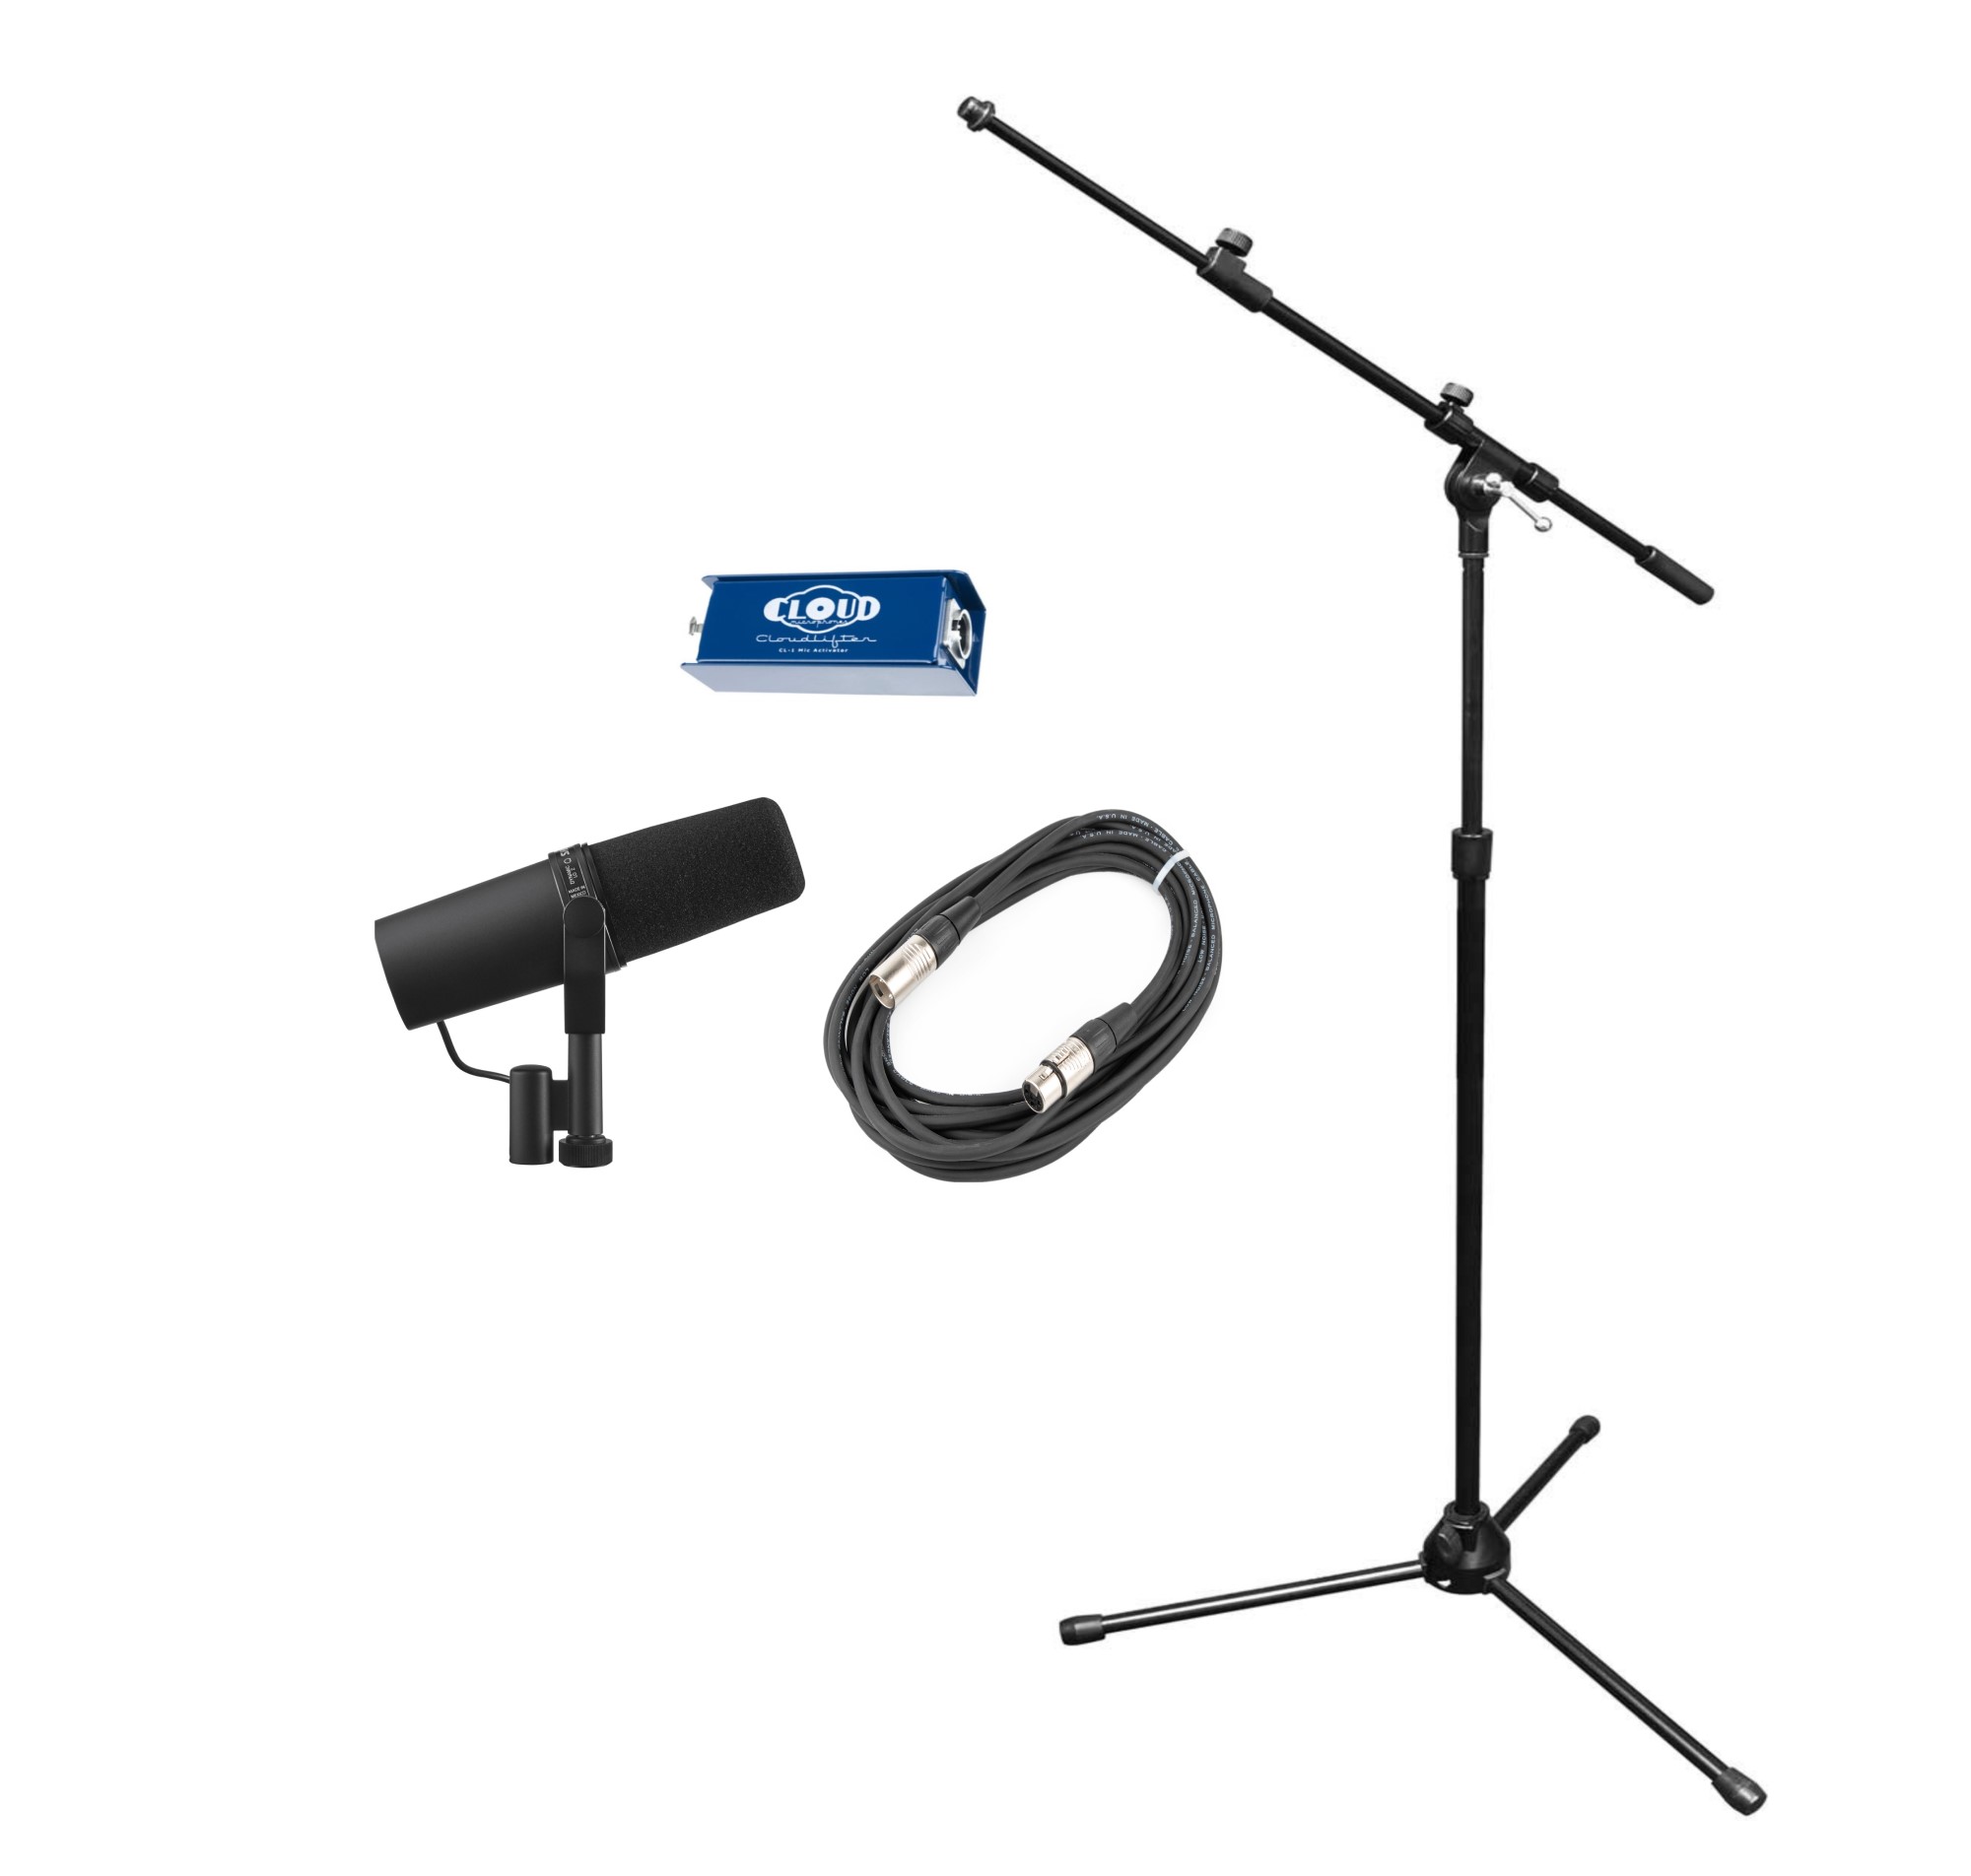 Shure SM7B Microphone Kit with Cloudlifter, Mic Stand, and Mic